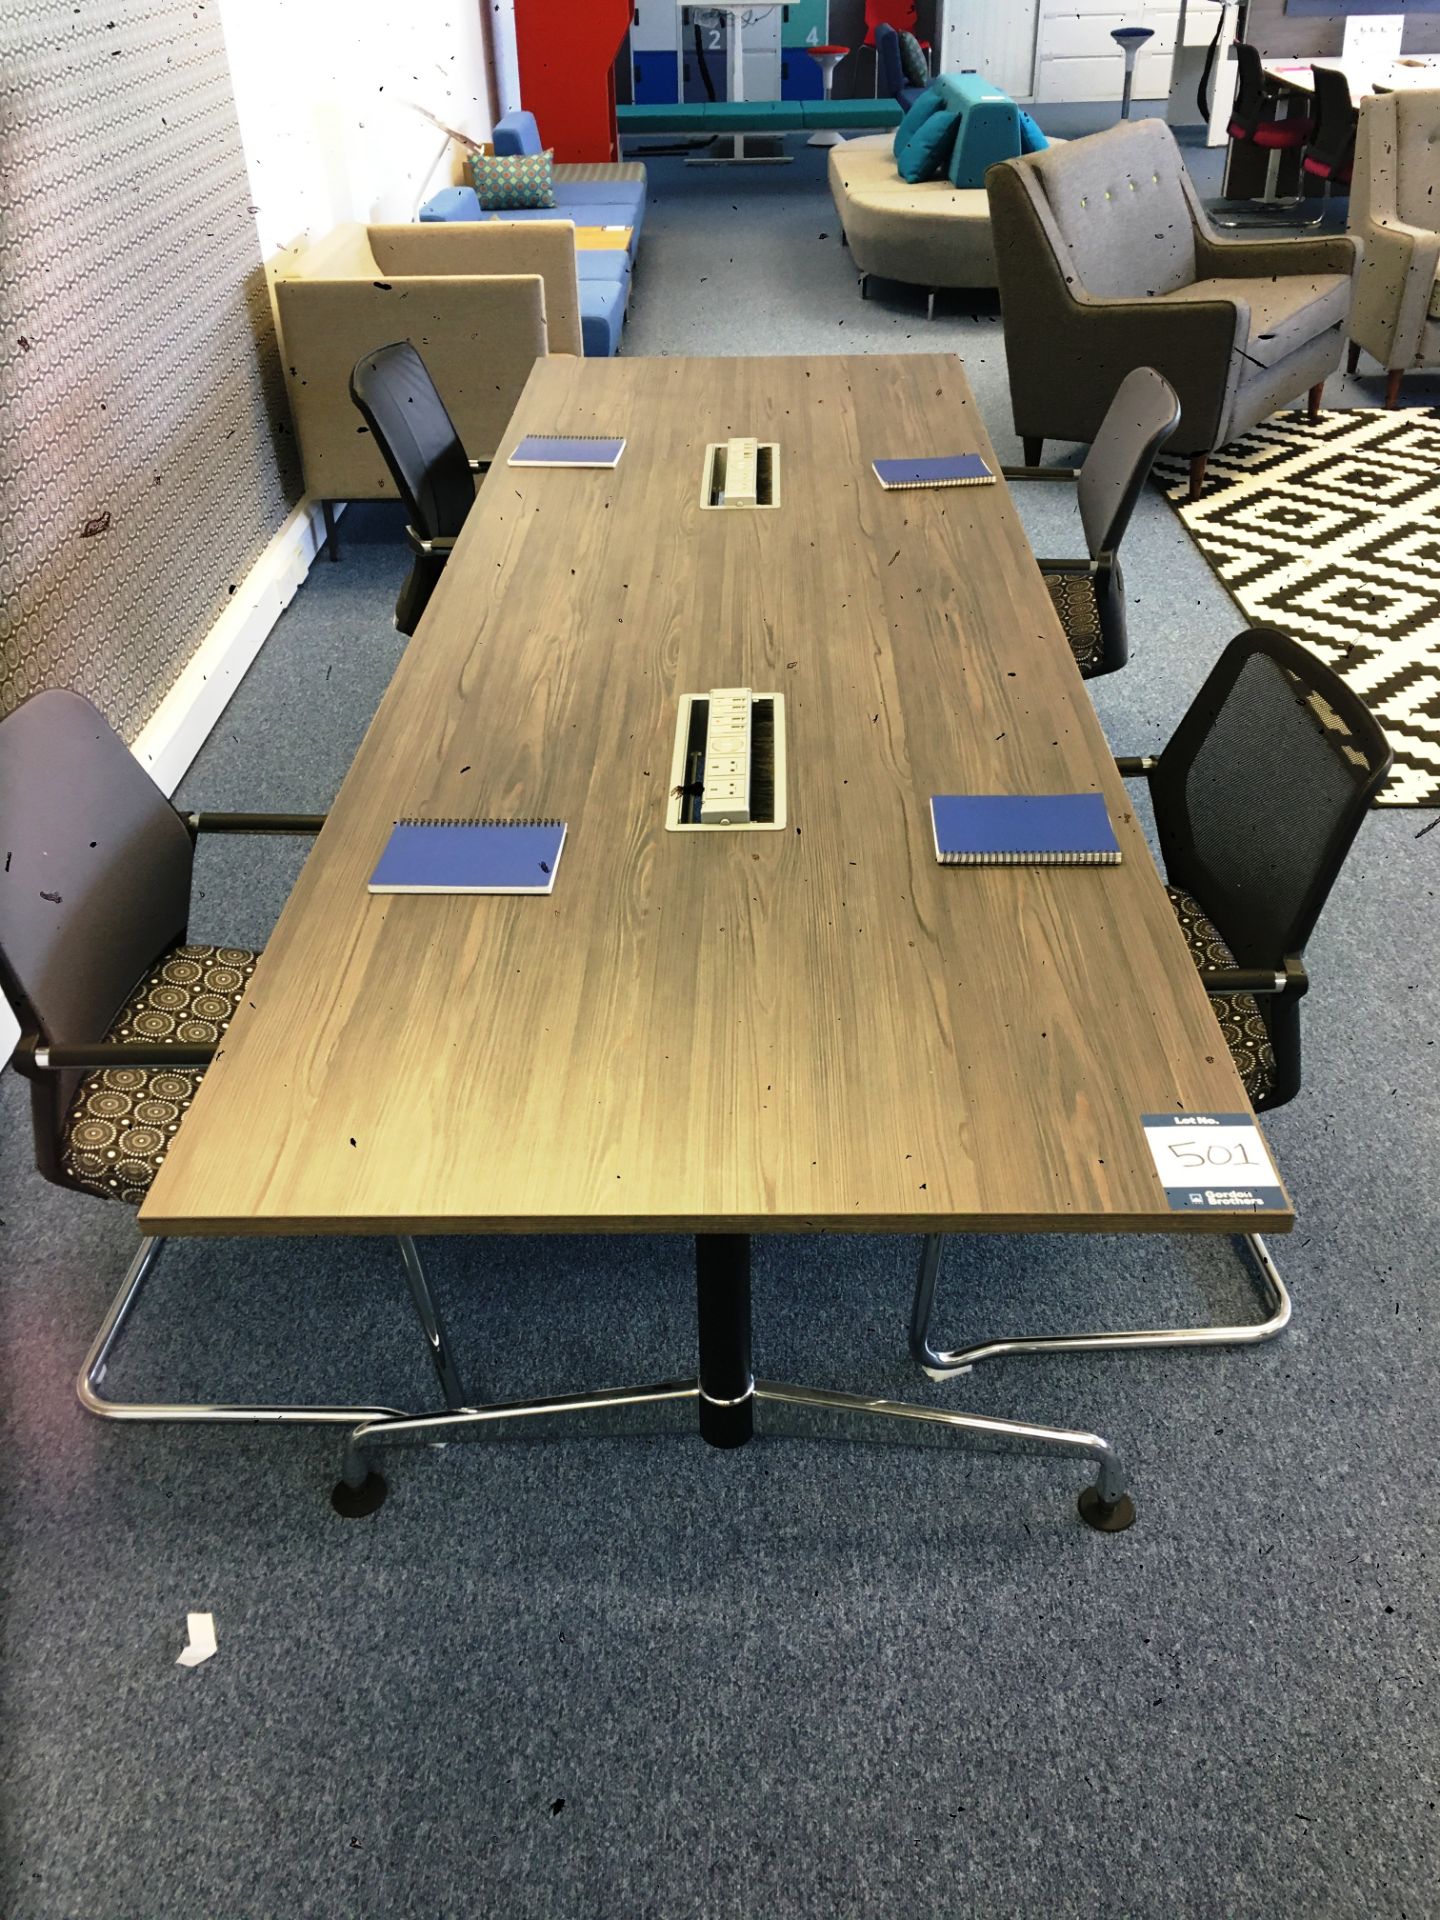 Rectangular boardroom table, L - 300cm x W - 100cm x H - 73cm with (2) integrated power points